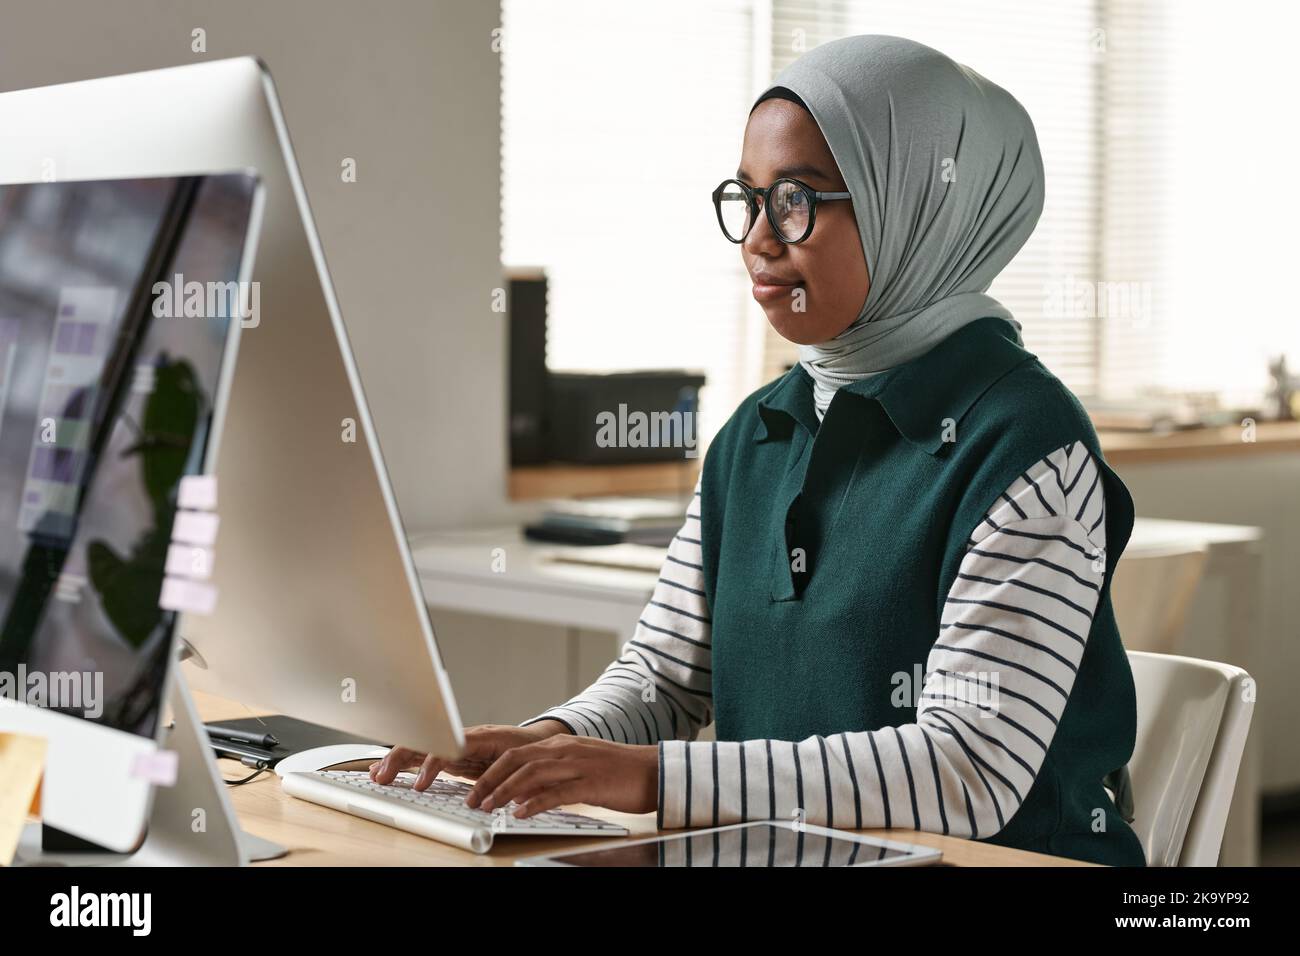 Young confident Muslim female intern or designer in eyeglasses, hijab and casualwear networking in front of computer monitor Stock Photo